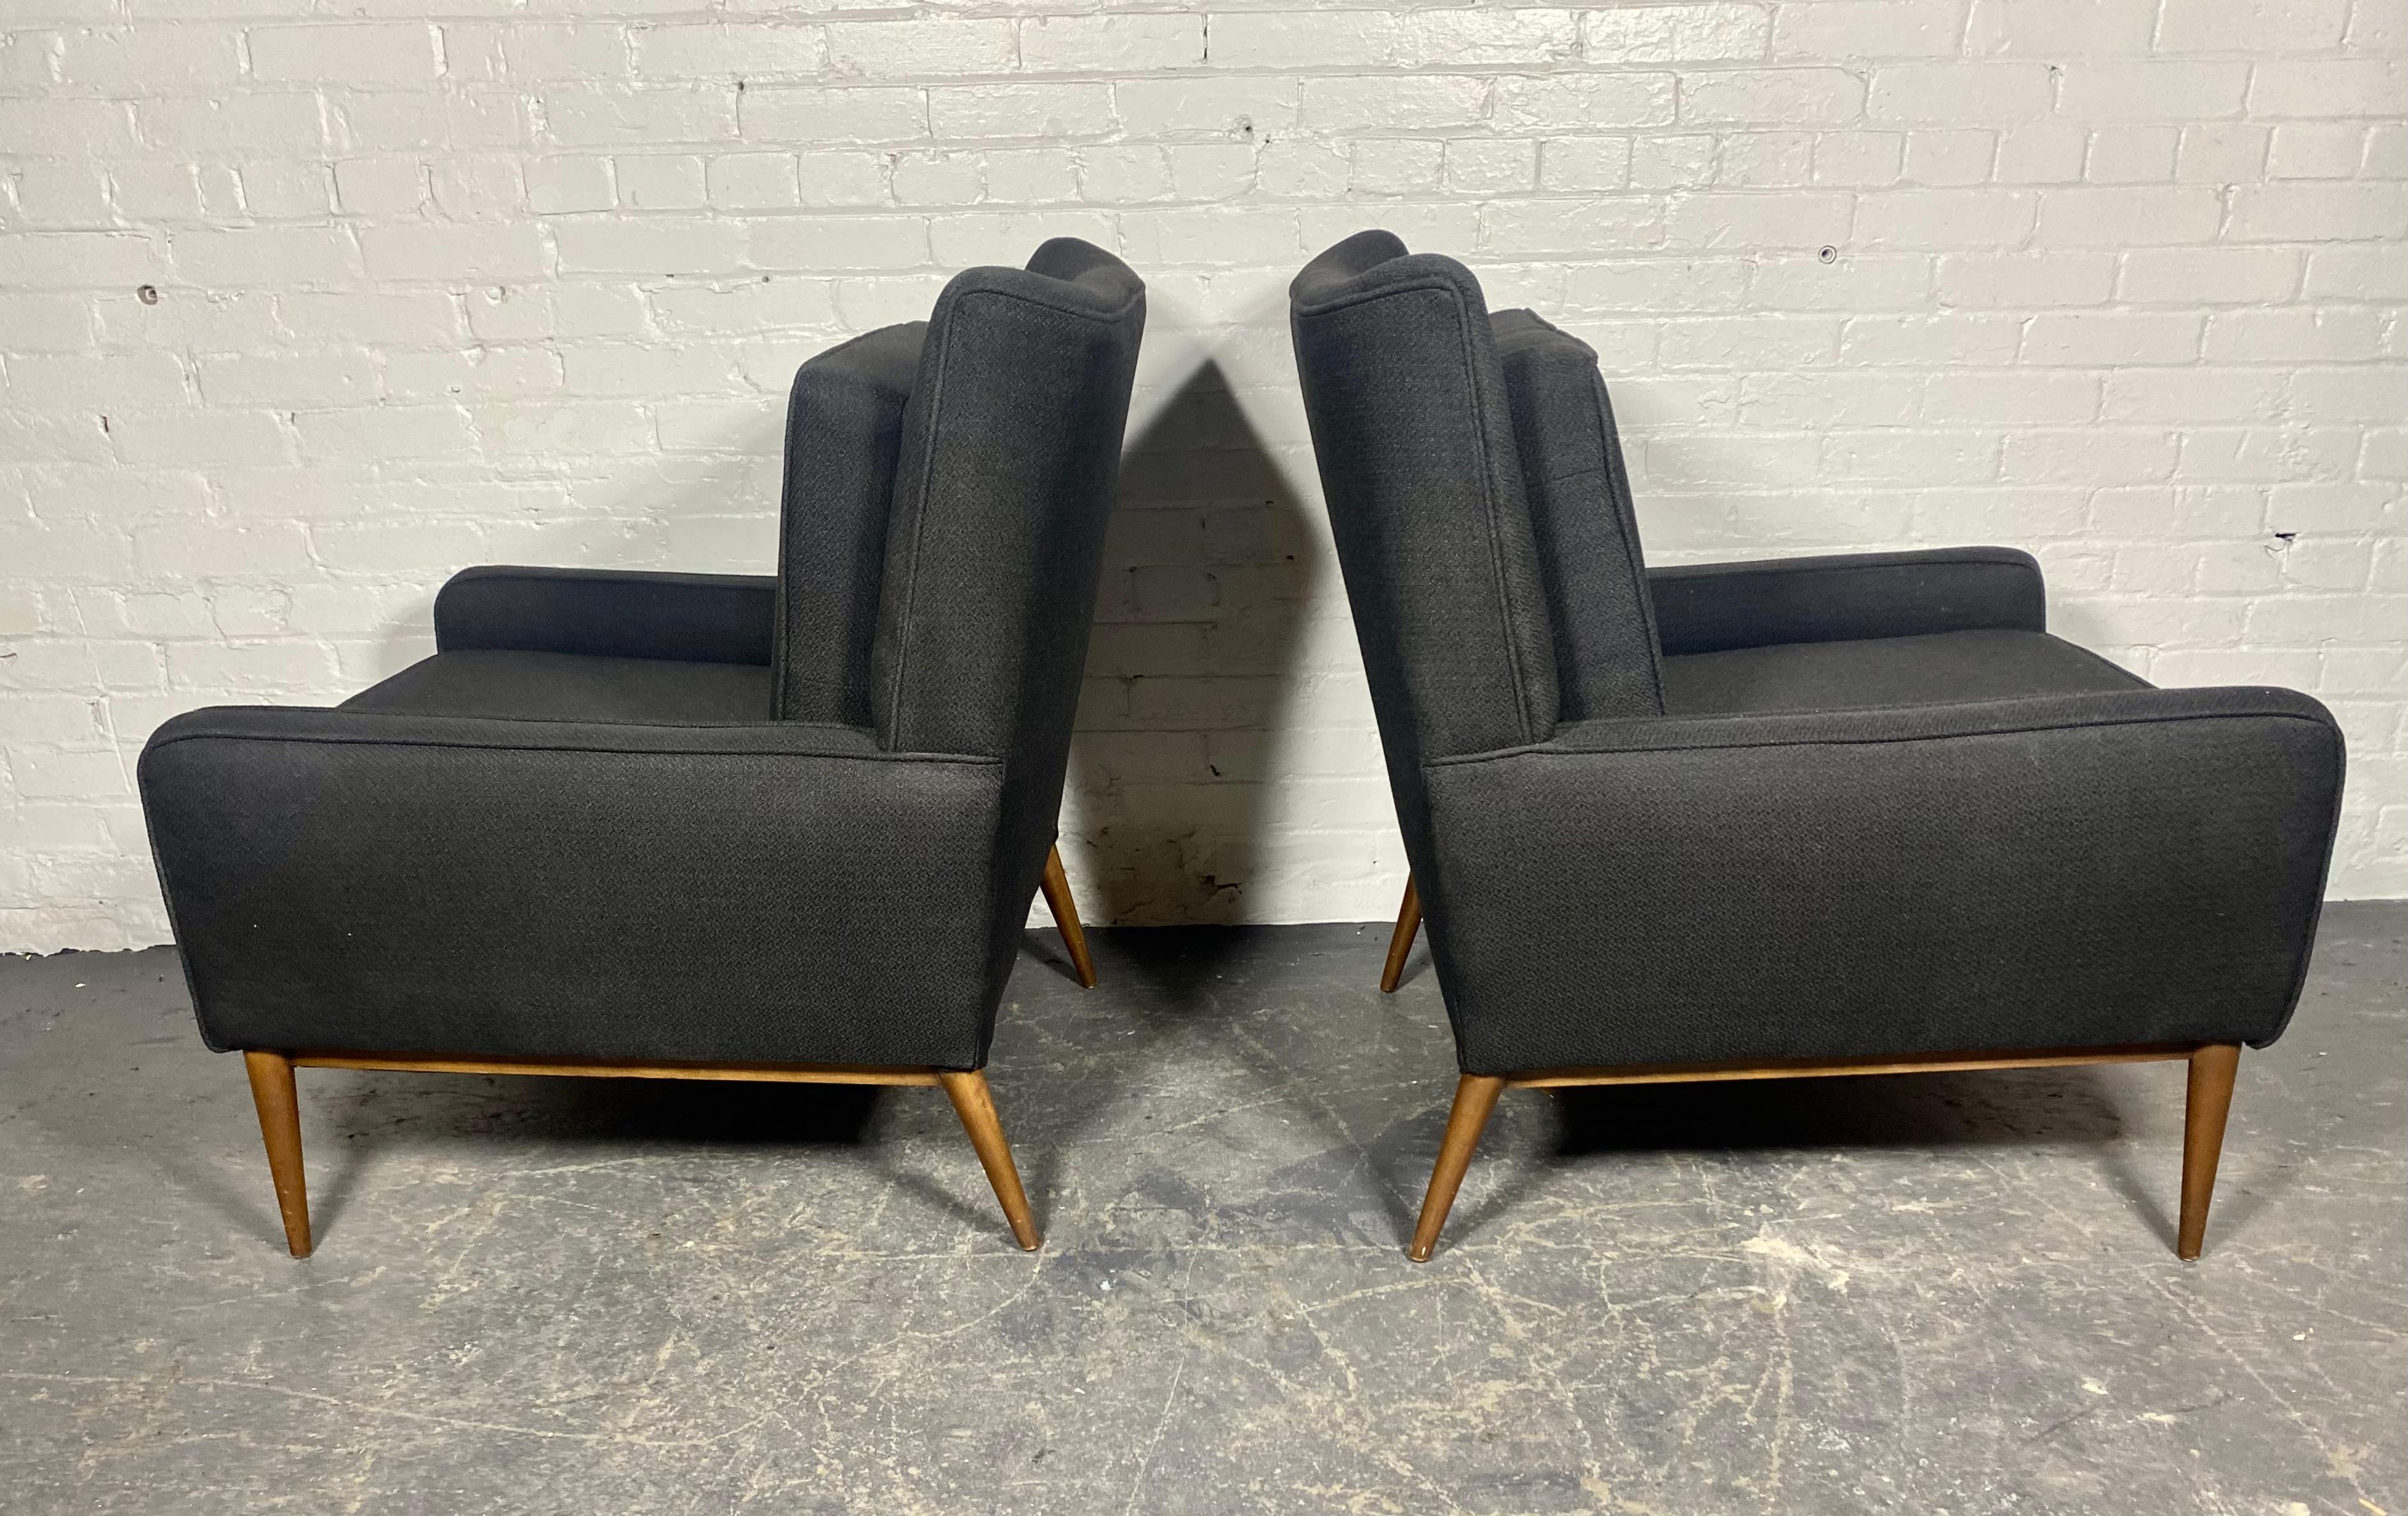 Classic Pair Modernist Lounge Chairs attributed to Paul McCobb / Directional.. I believe these were re-upholstered 30-40 years ago, Professional job,,very well done in a period mid century black wool blend / nylon fabric,, Wonderful lines,,stunning